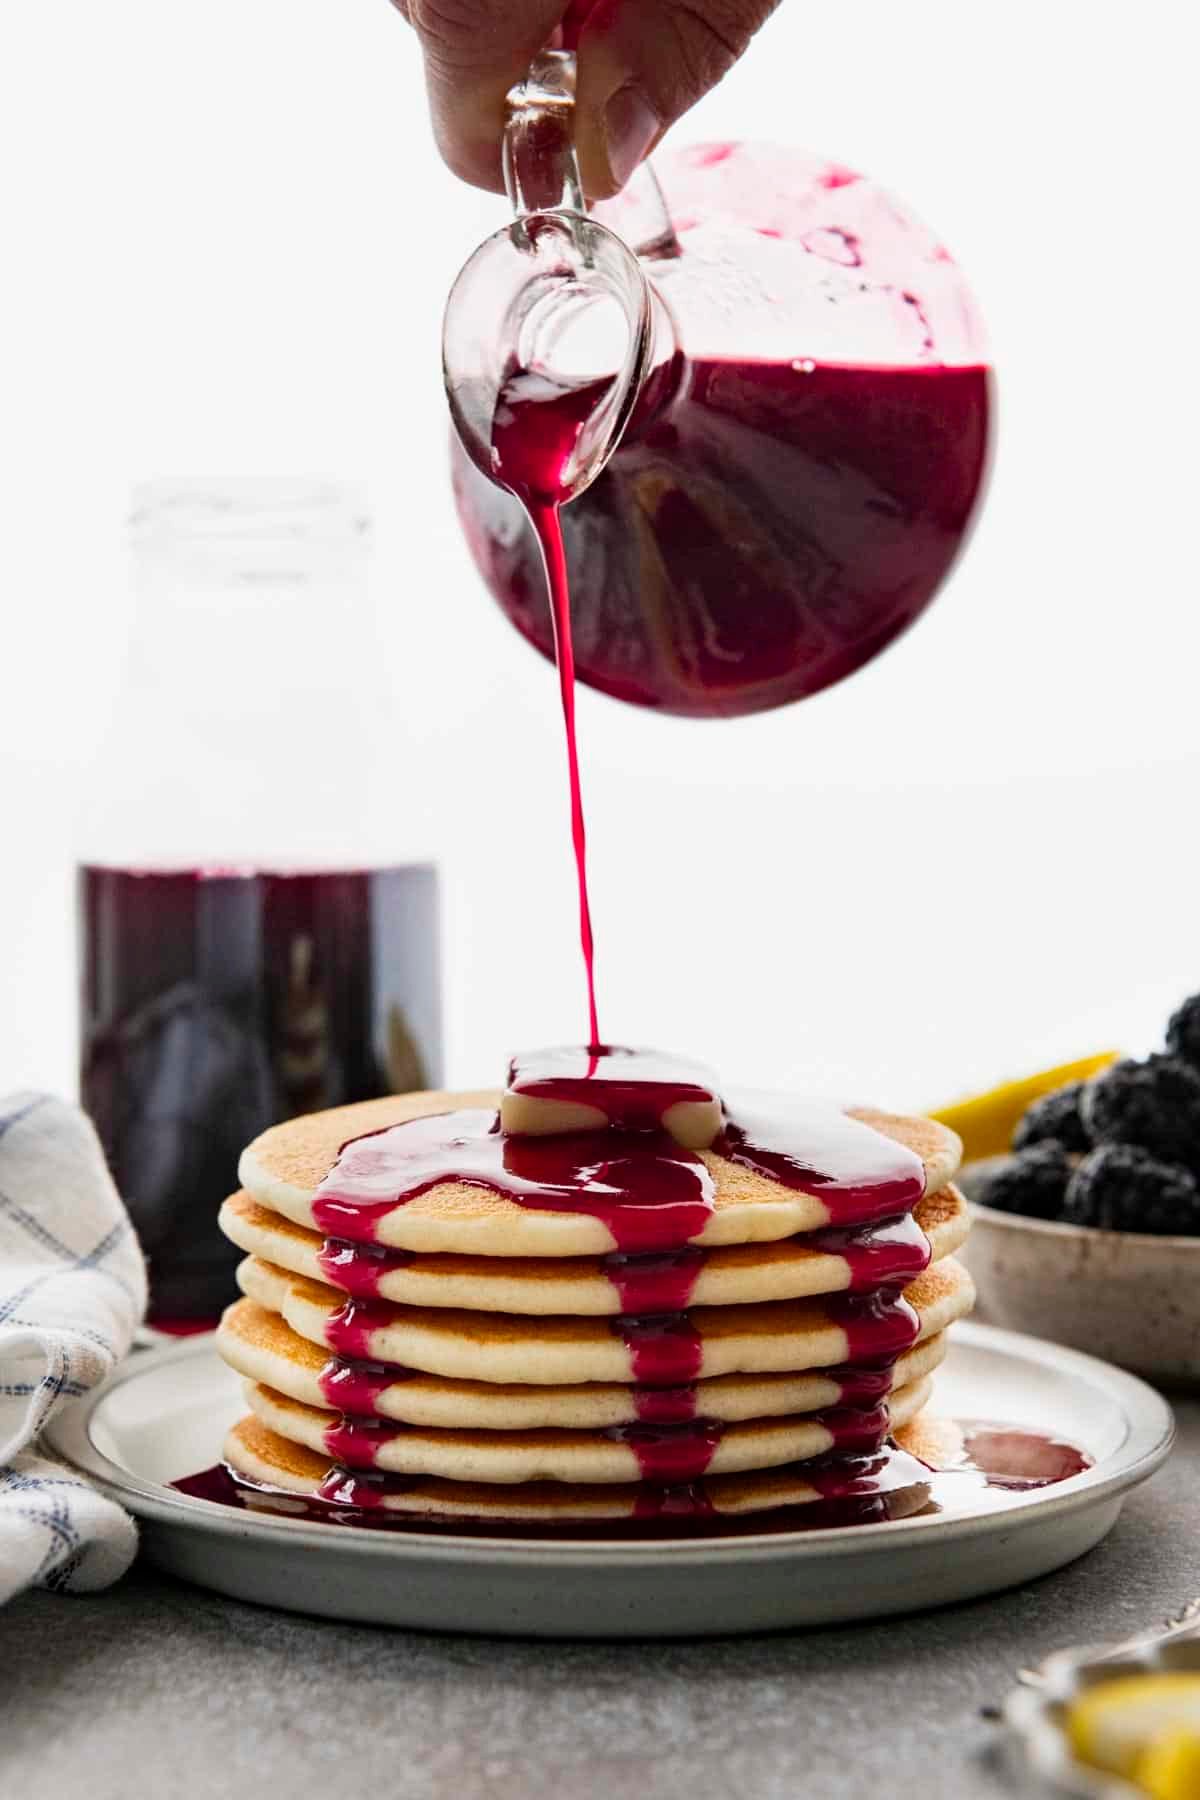 Pouring the best blackberry syrup recipe on a plate of pancakes.